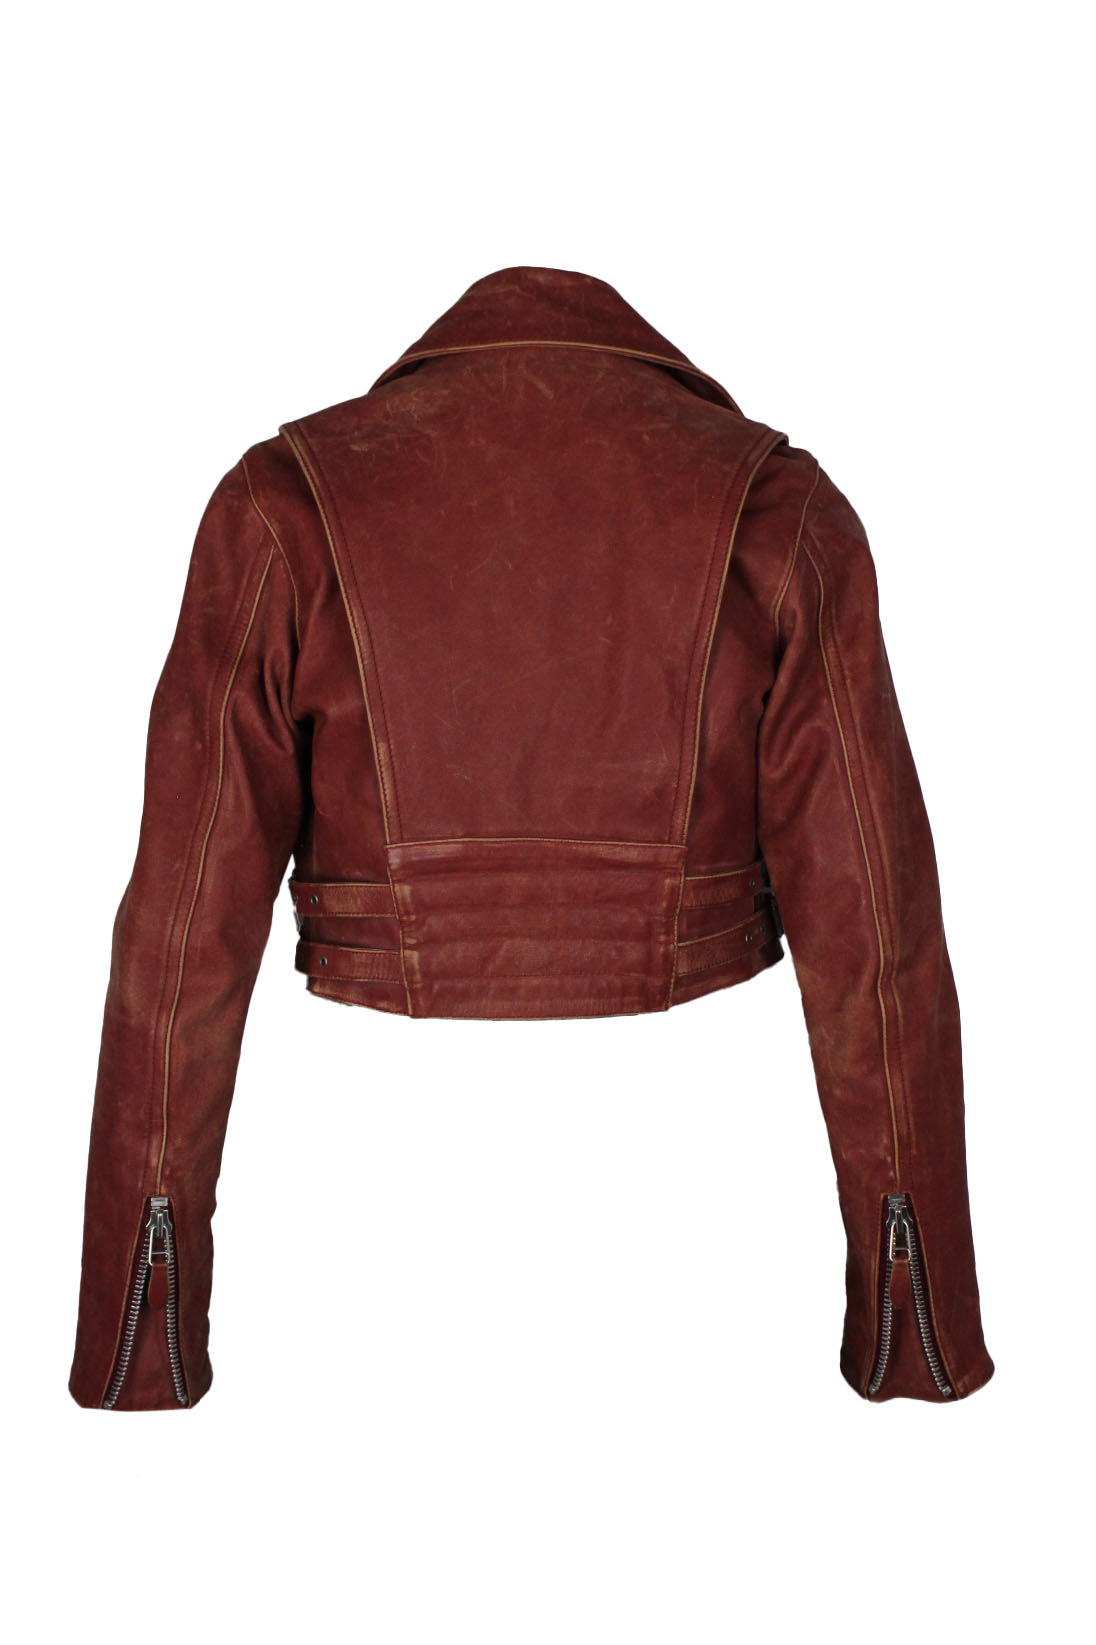 back of red leather jacket.